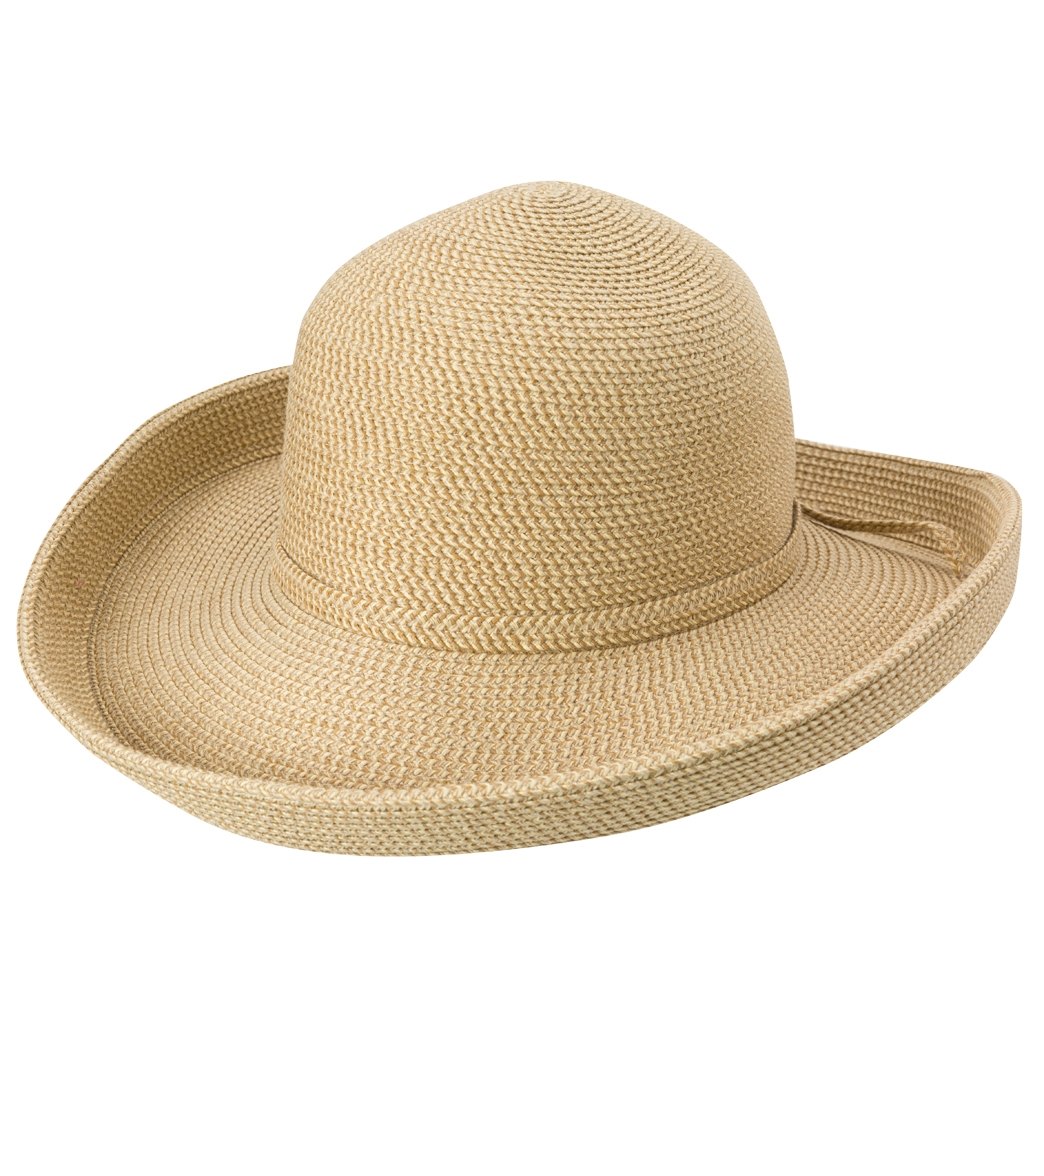 Sunday Afternoons Women's Kauai Hat - Natural Cotton/Polyester - Swimoutlet.com